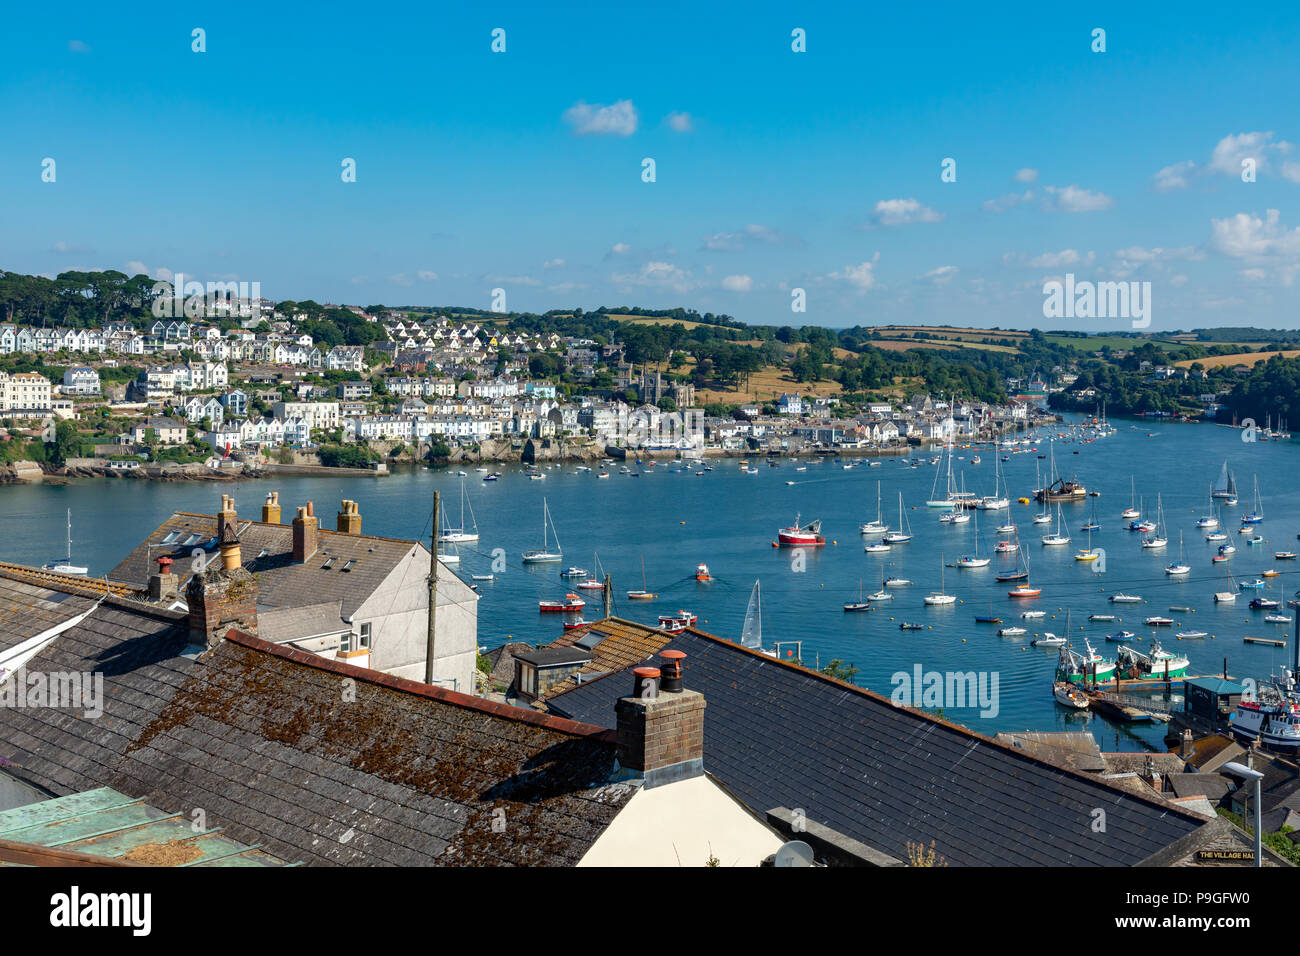 Fowey Cornwall England July 14, 2018 View of Fowey across the river estuary from Polruan Stock Photo